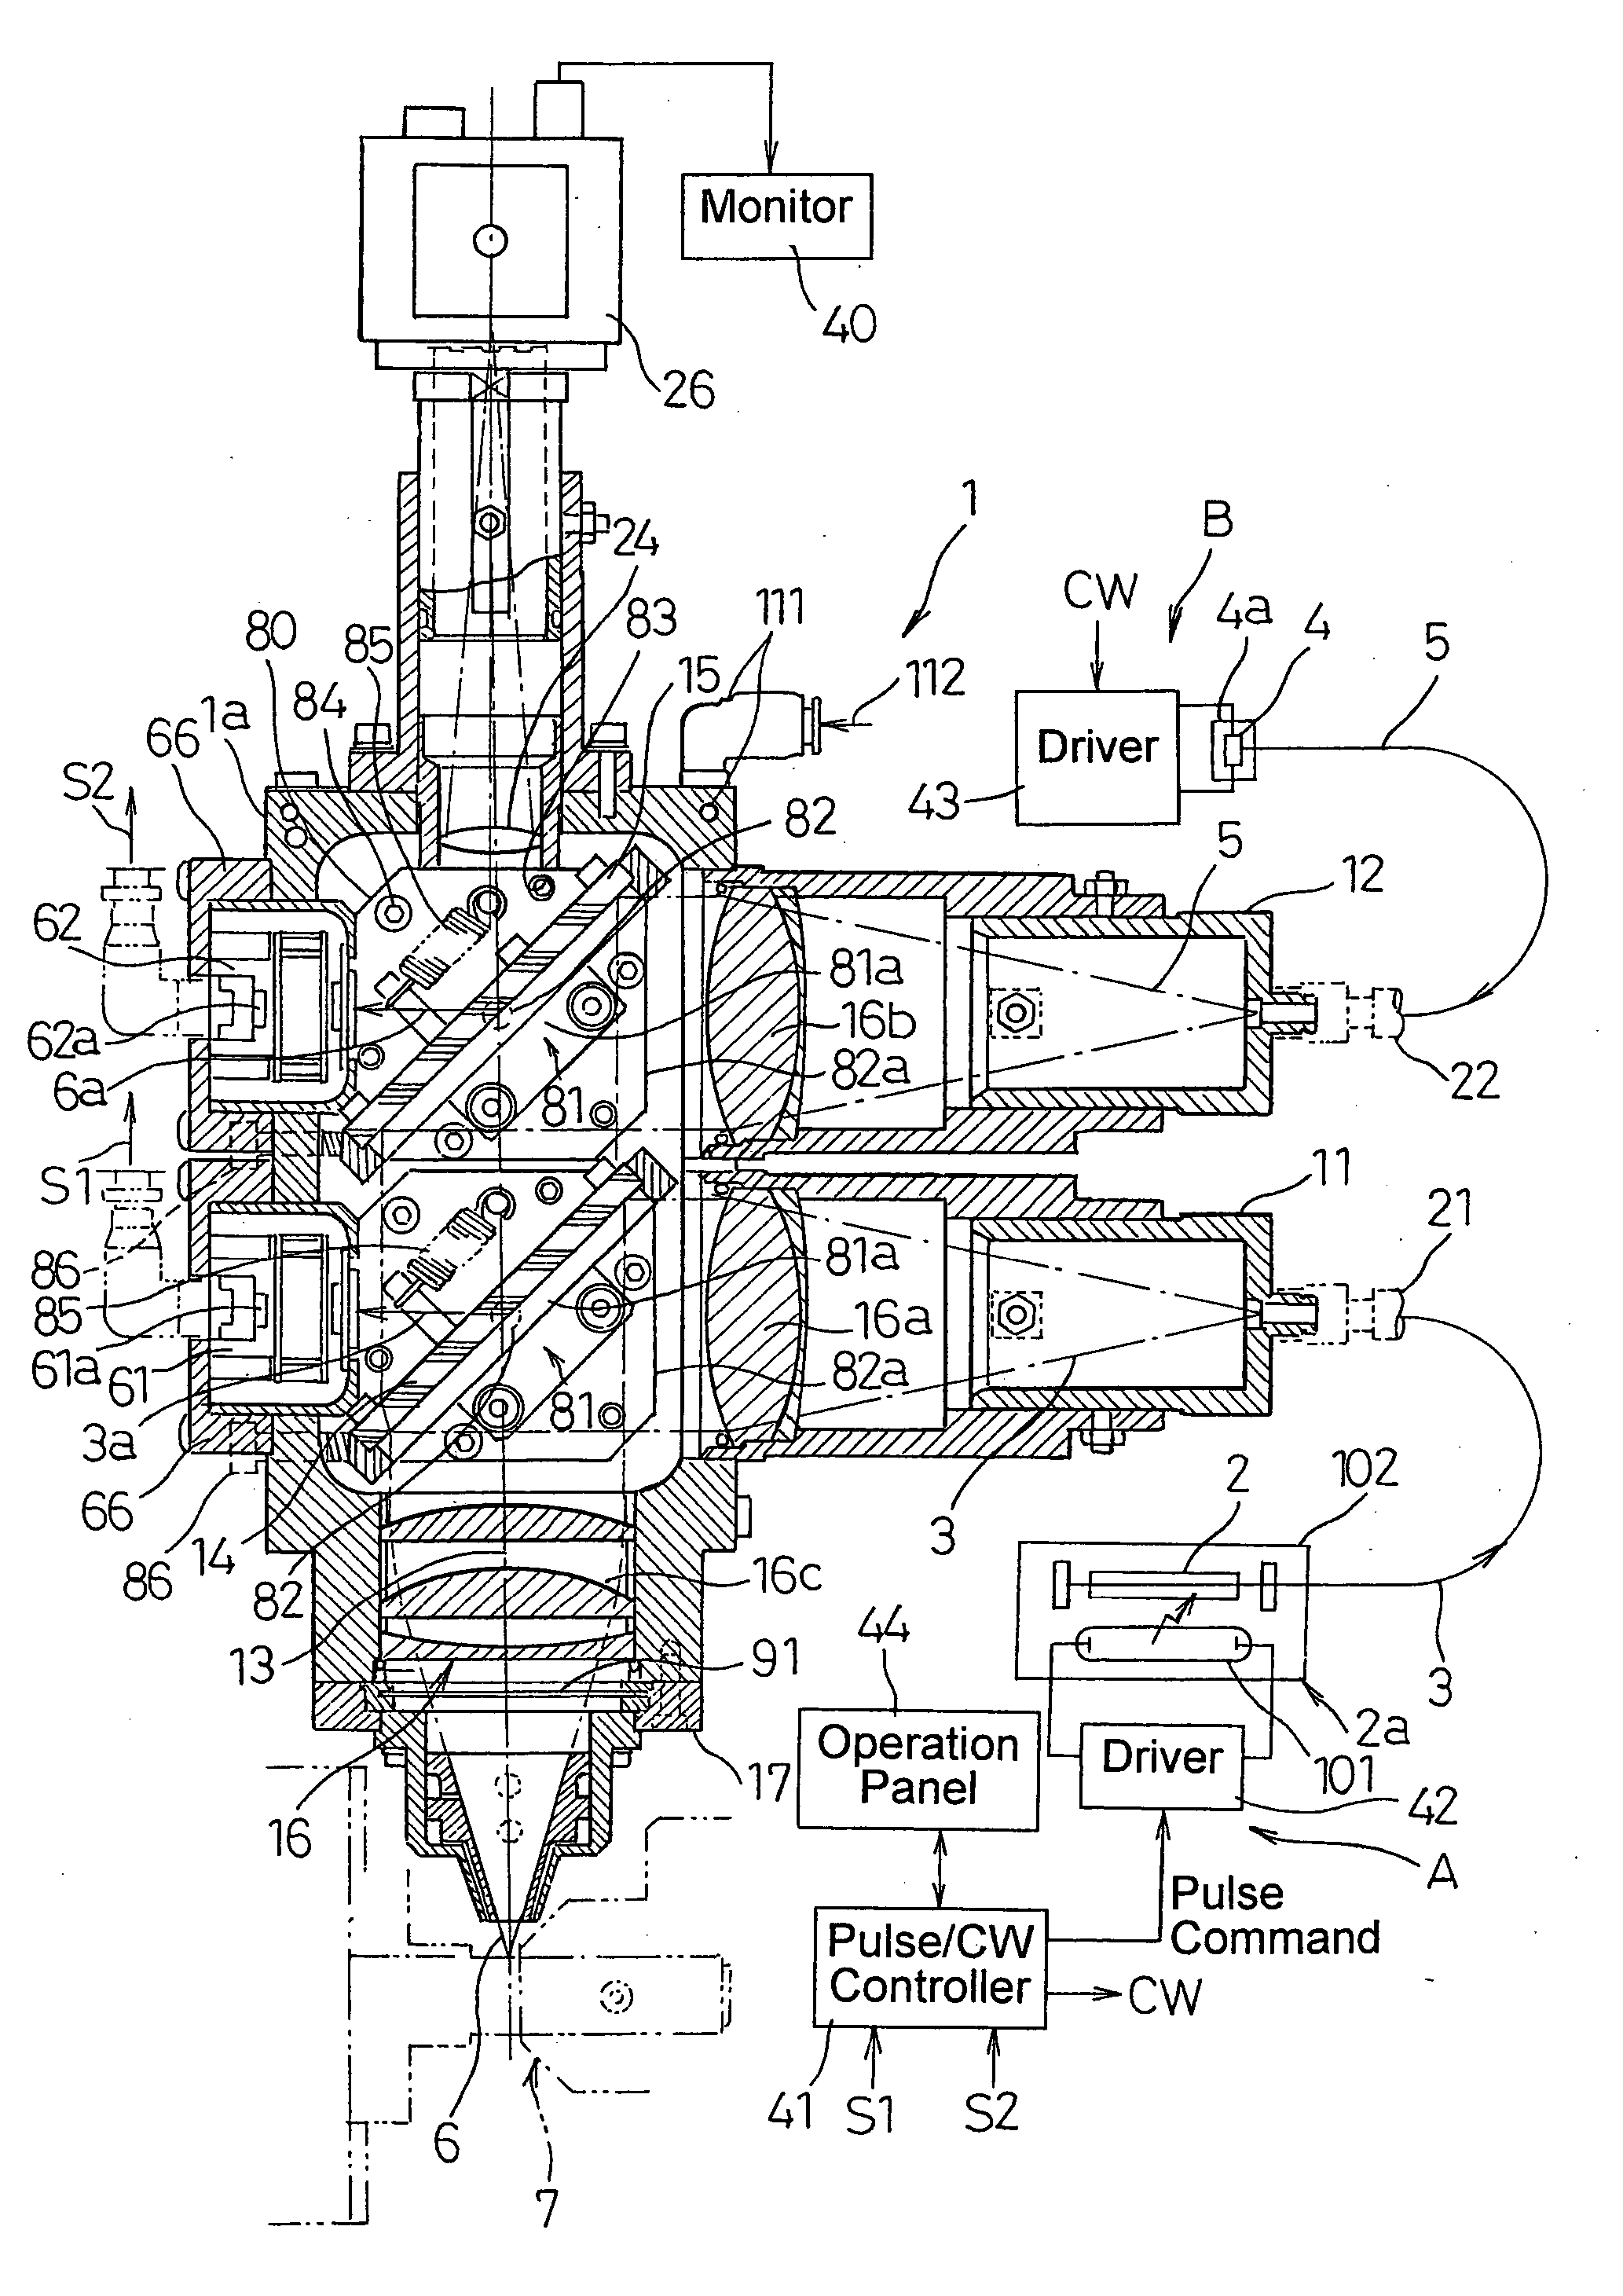 Hybrid laser processing method and hybrid laser torch used in the method